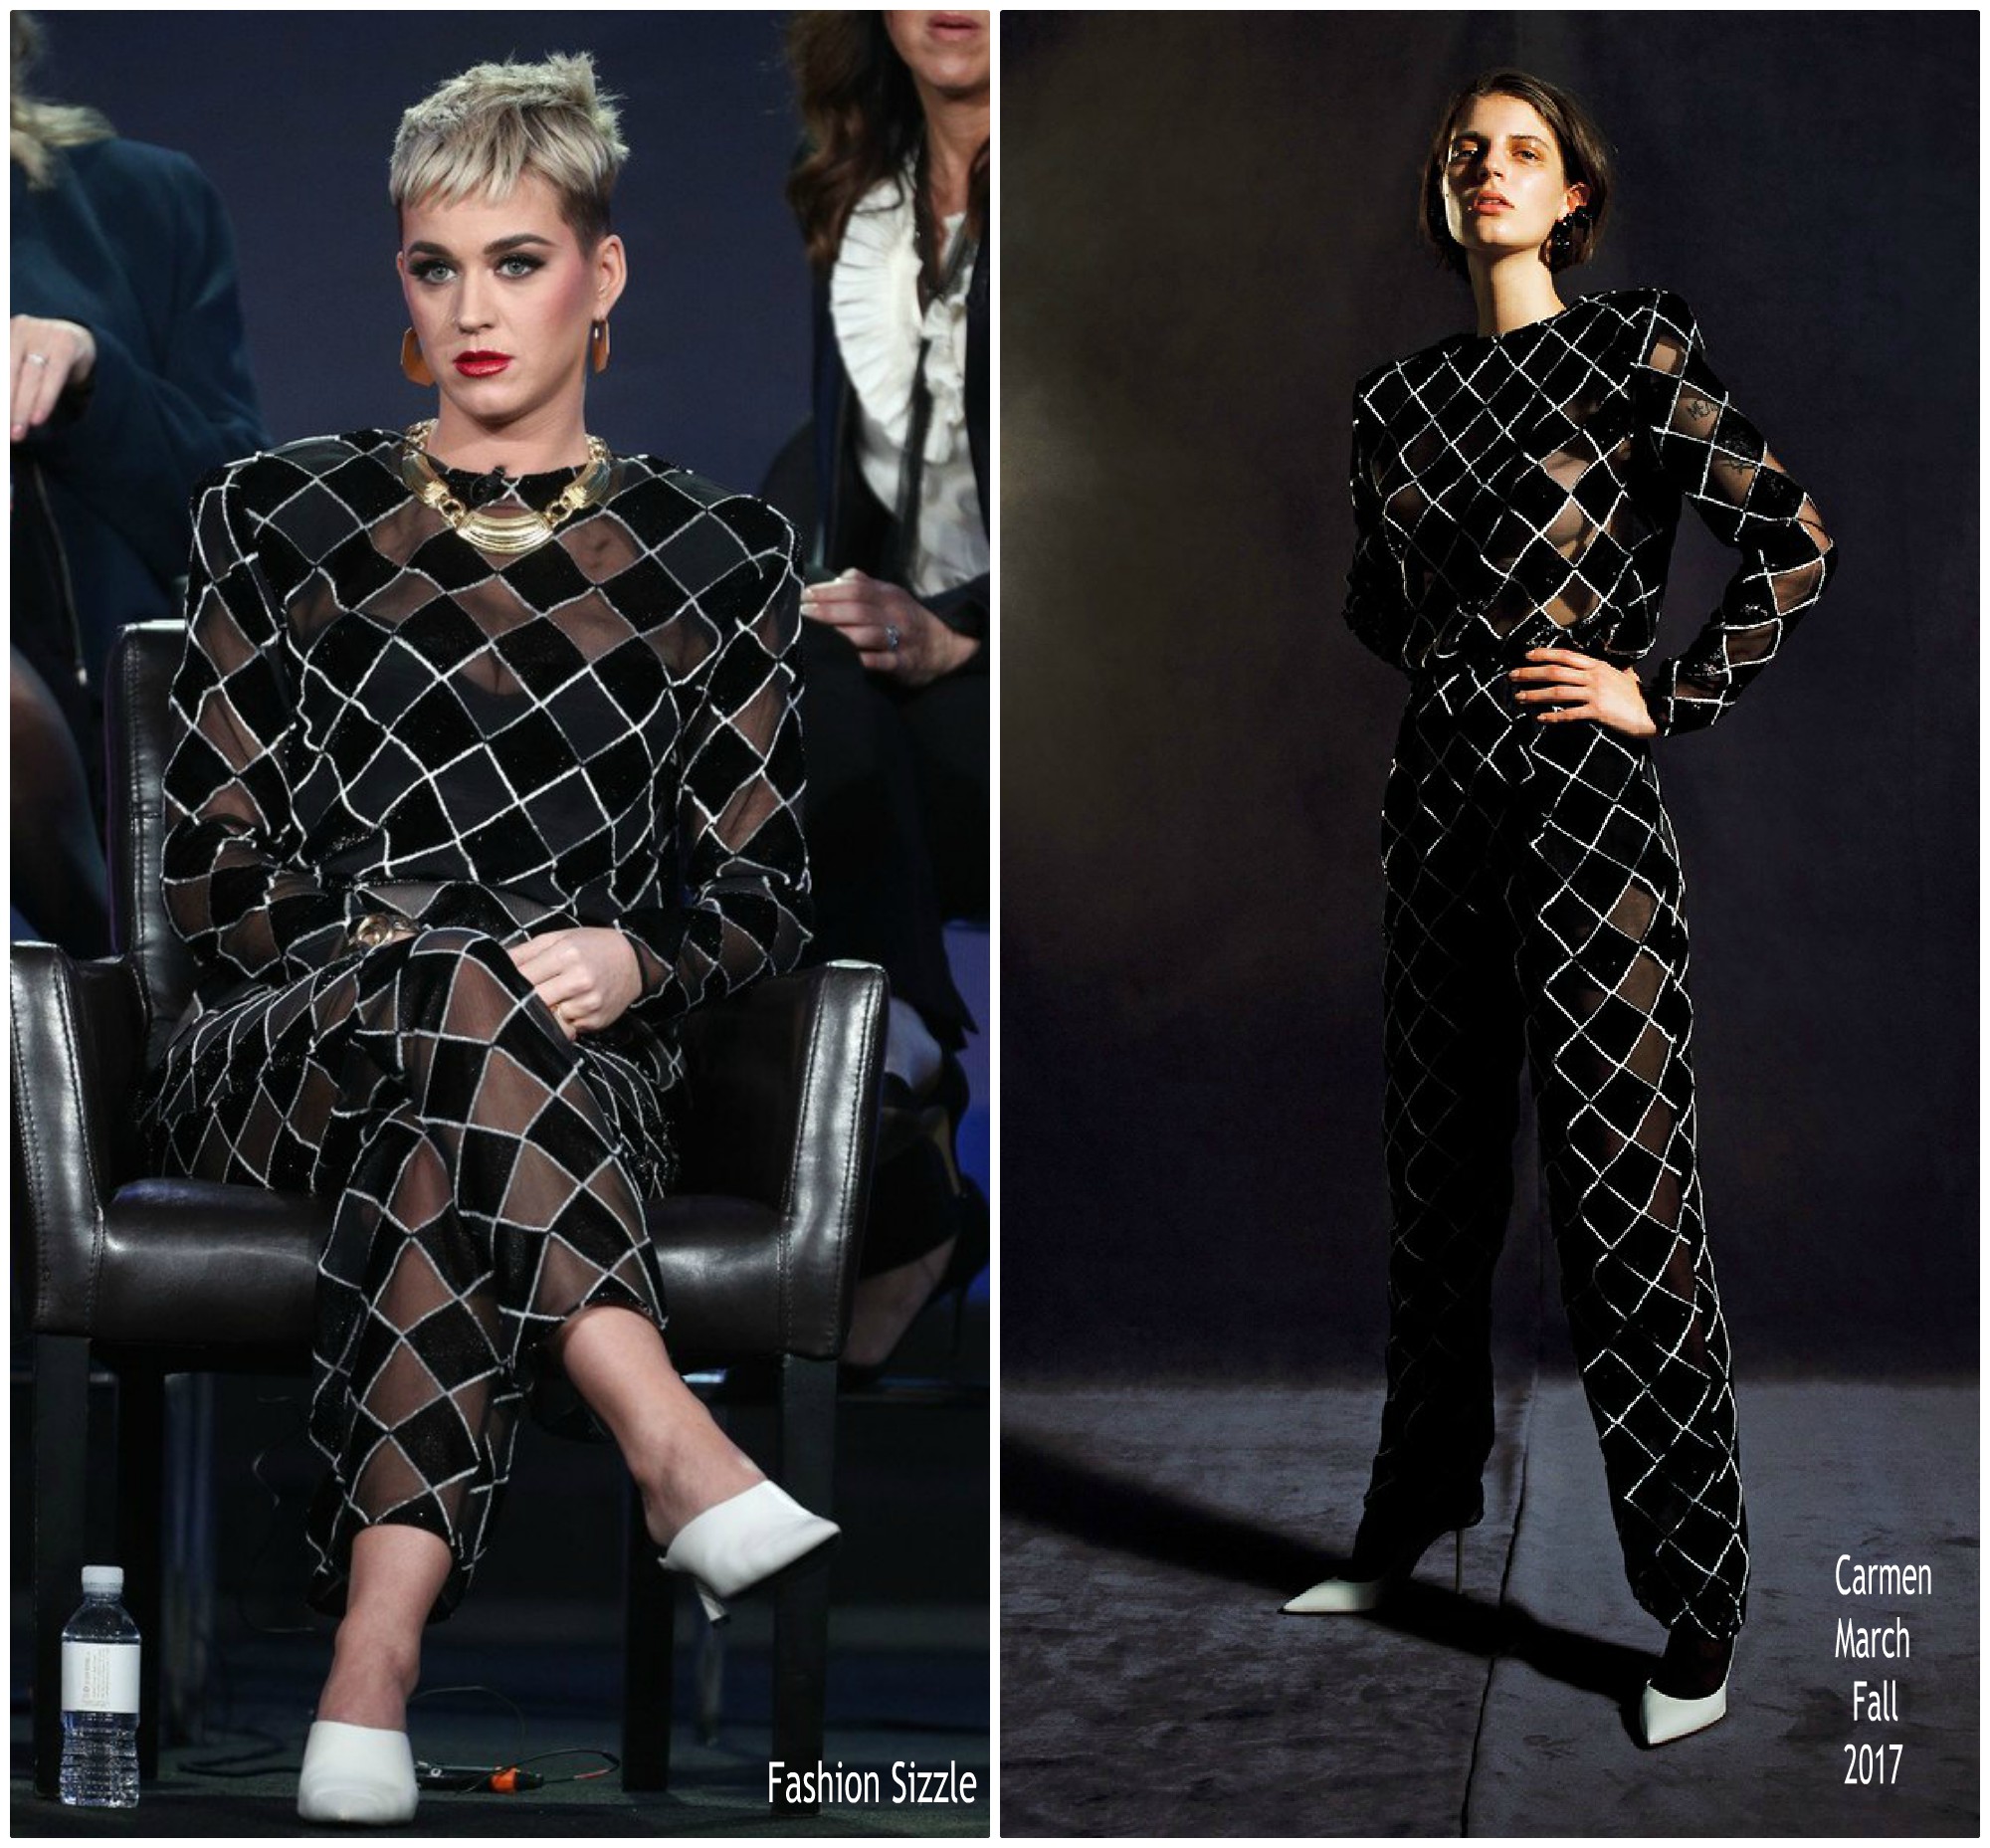 Katy Perry  In Carmen March   @ 2018 Winter TCA Tour: ABC for “American Idol”.